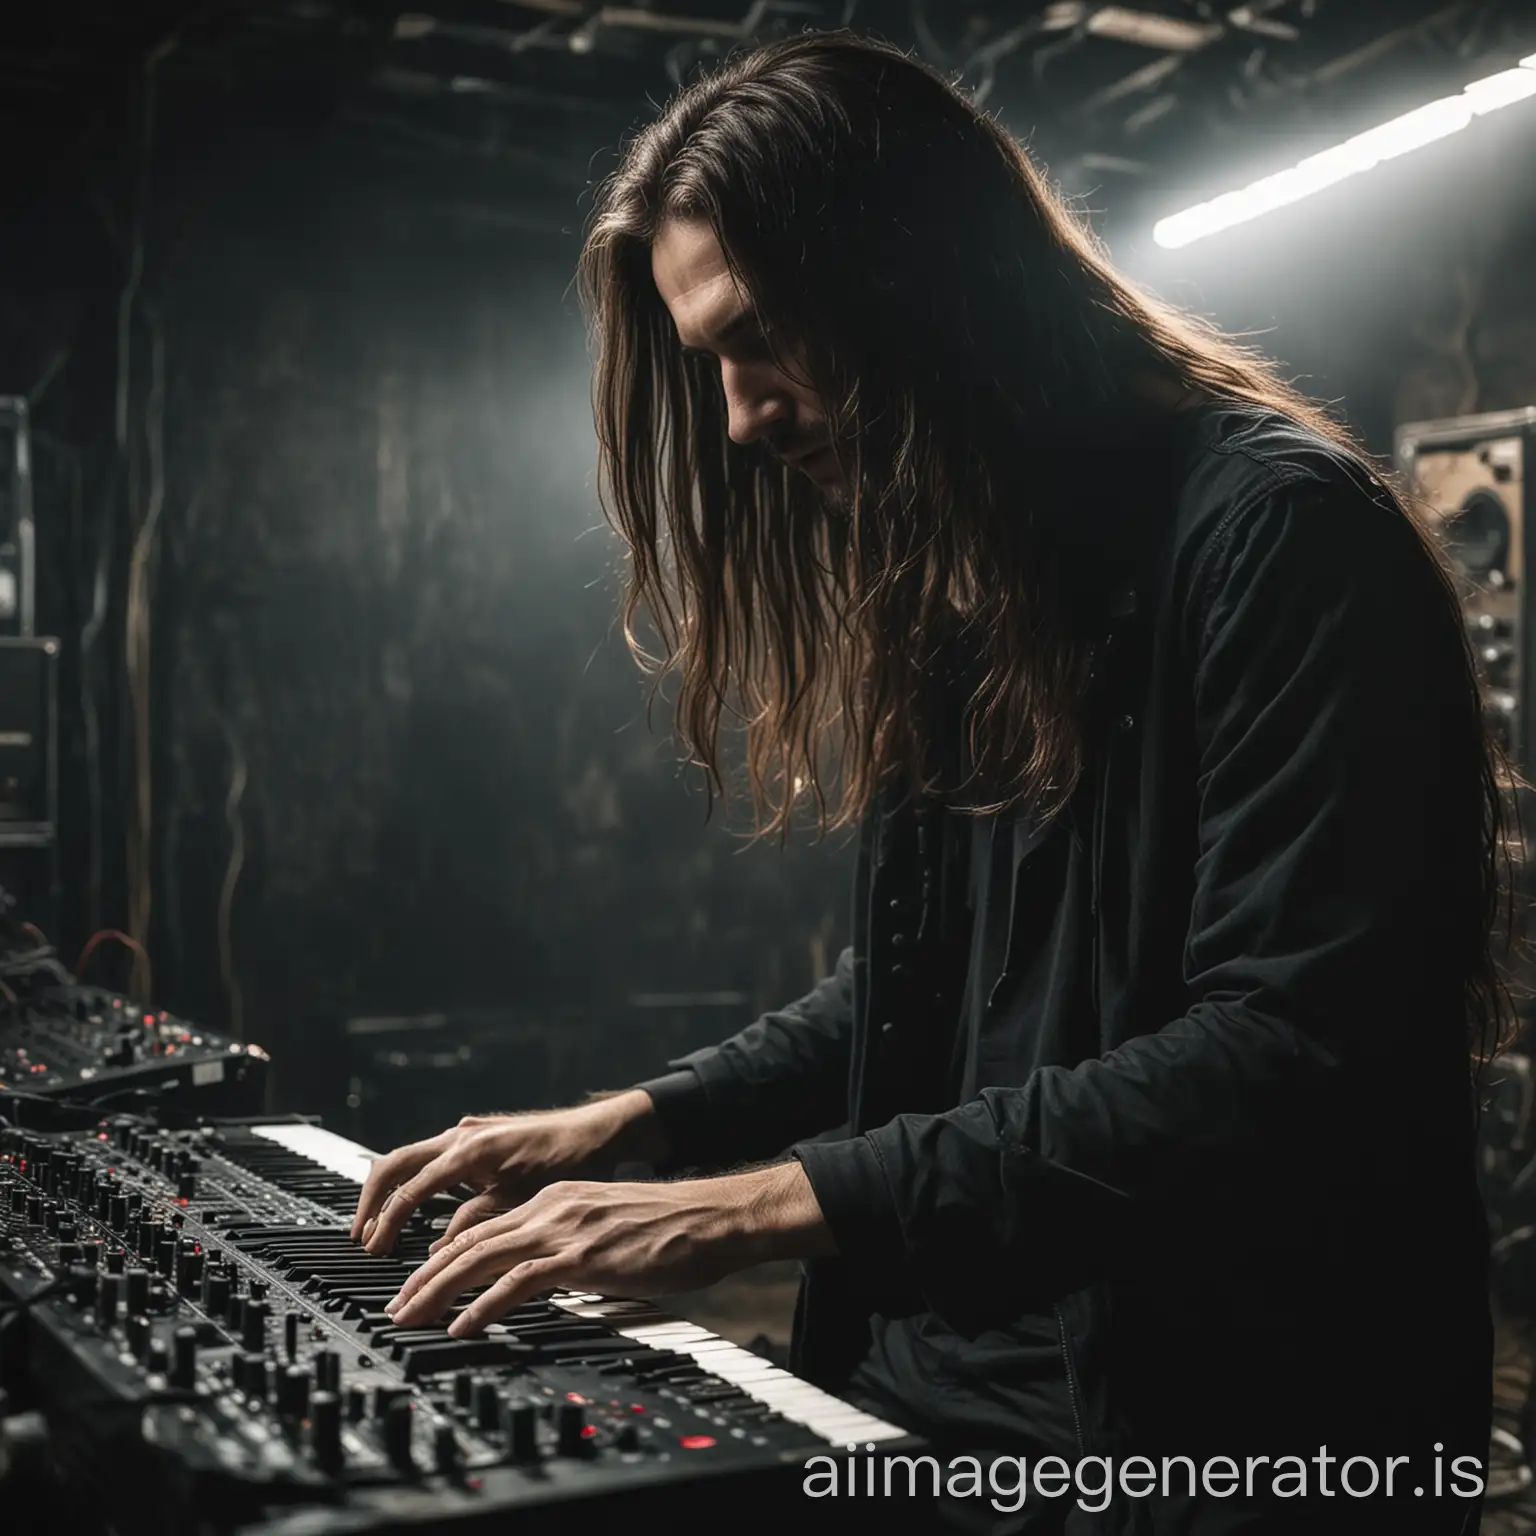 LongHaired-Man-Playing-Electronic-Synthesizer-in-Underground-Club